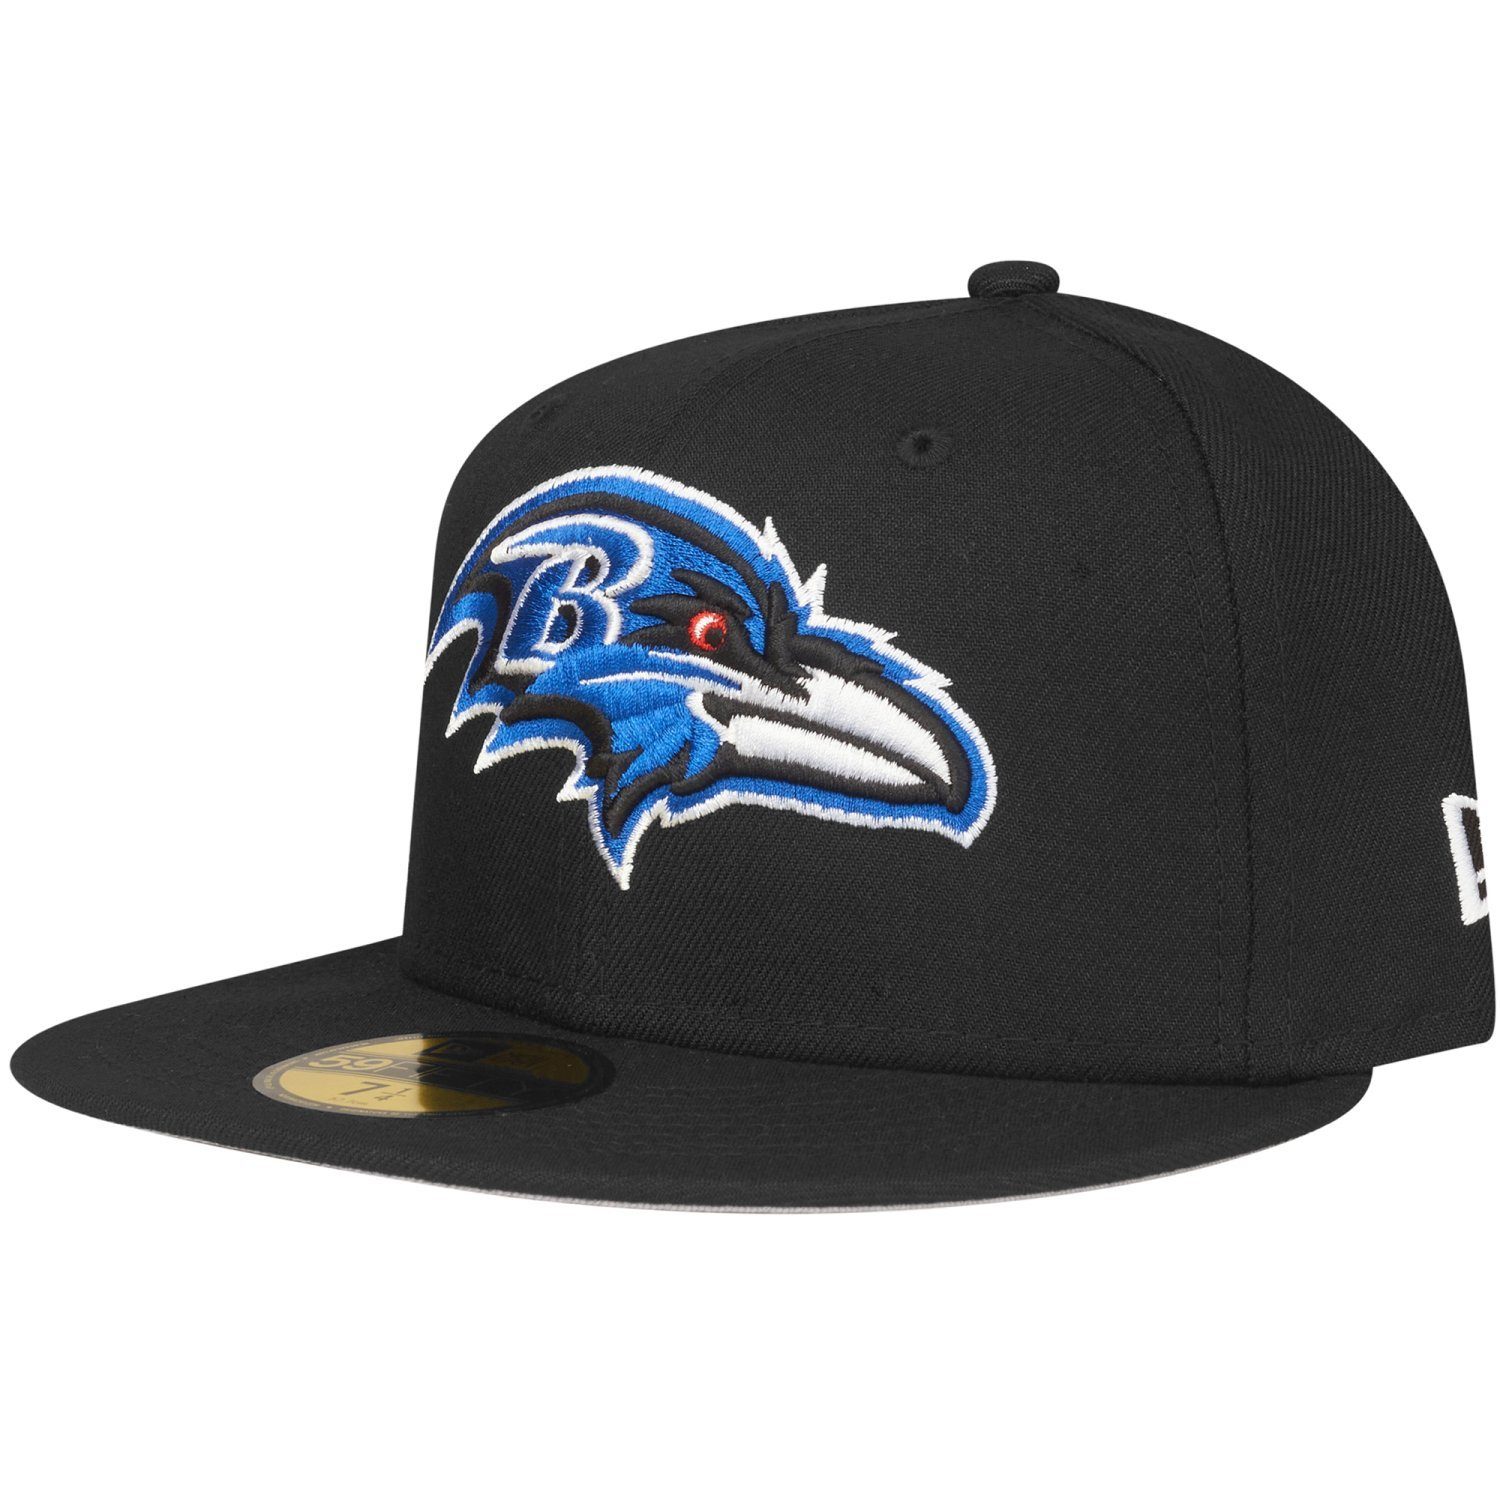 New Era Fitted Cap 59Fifty NFL TEAMS Baltimore Ravens | Fitted Caps